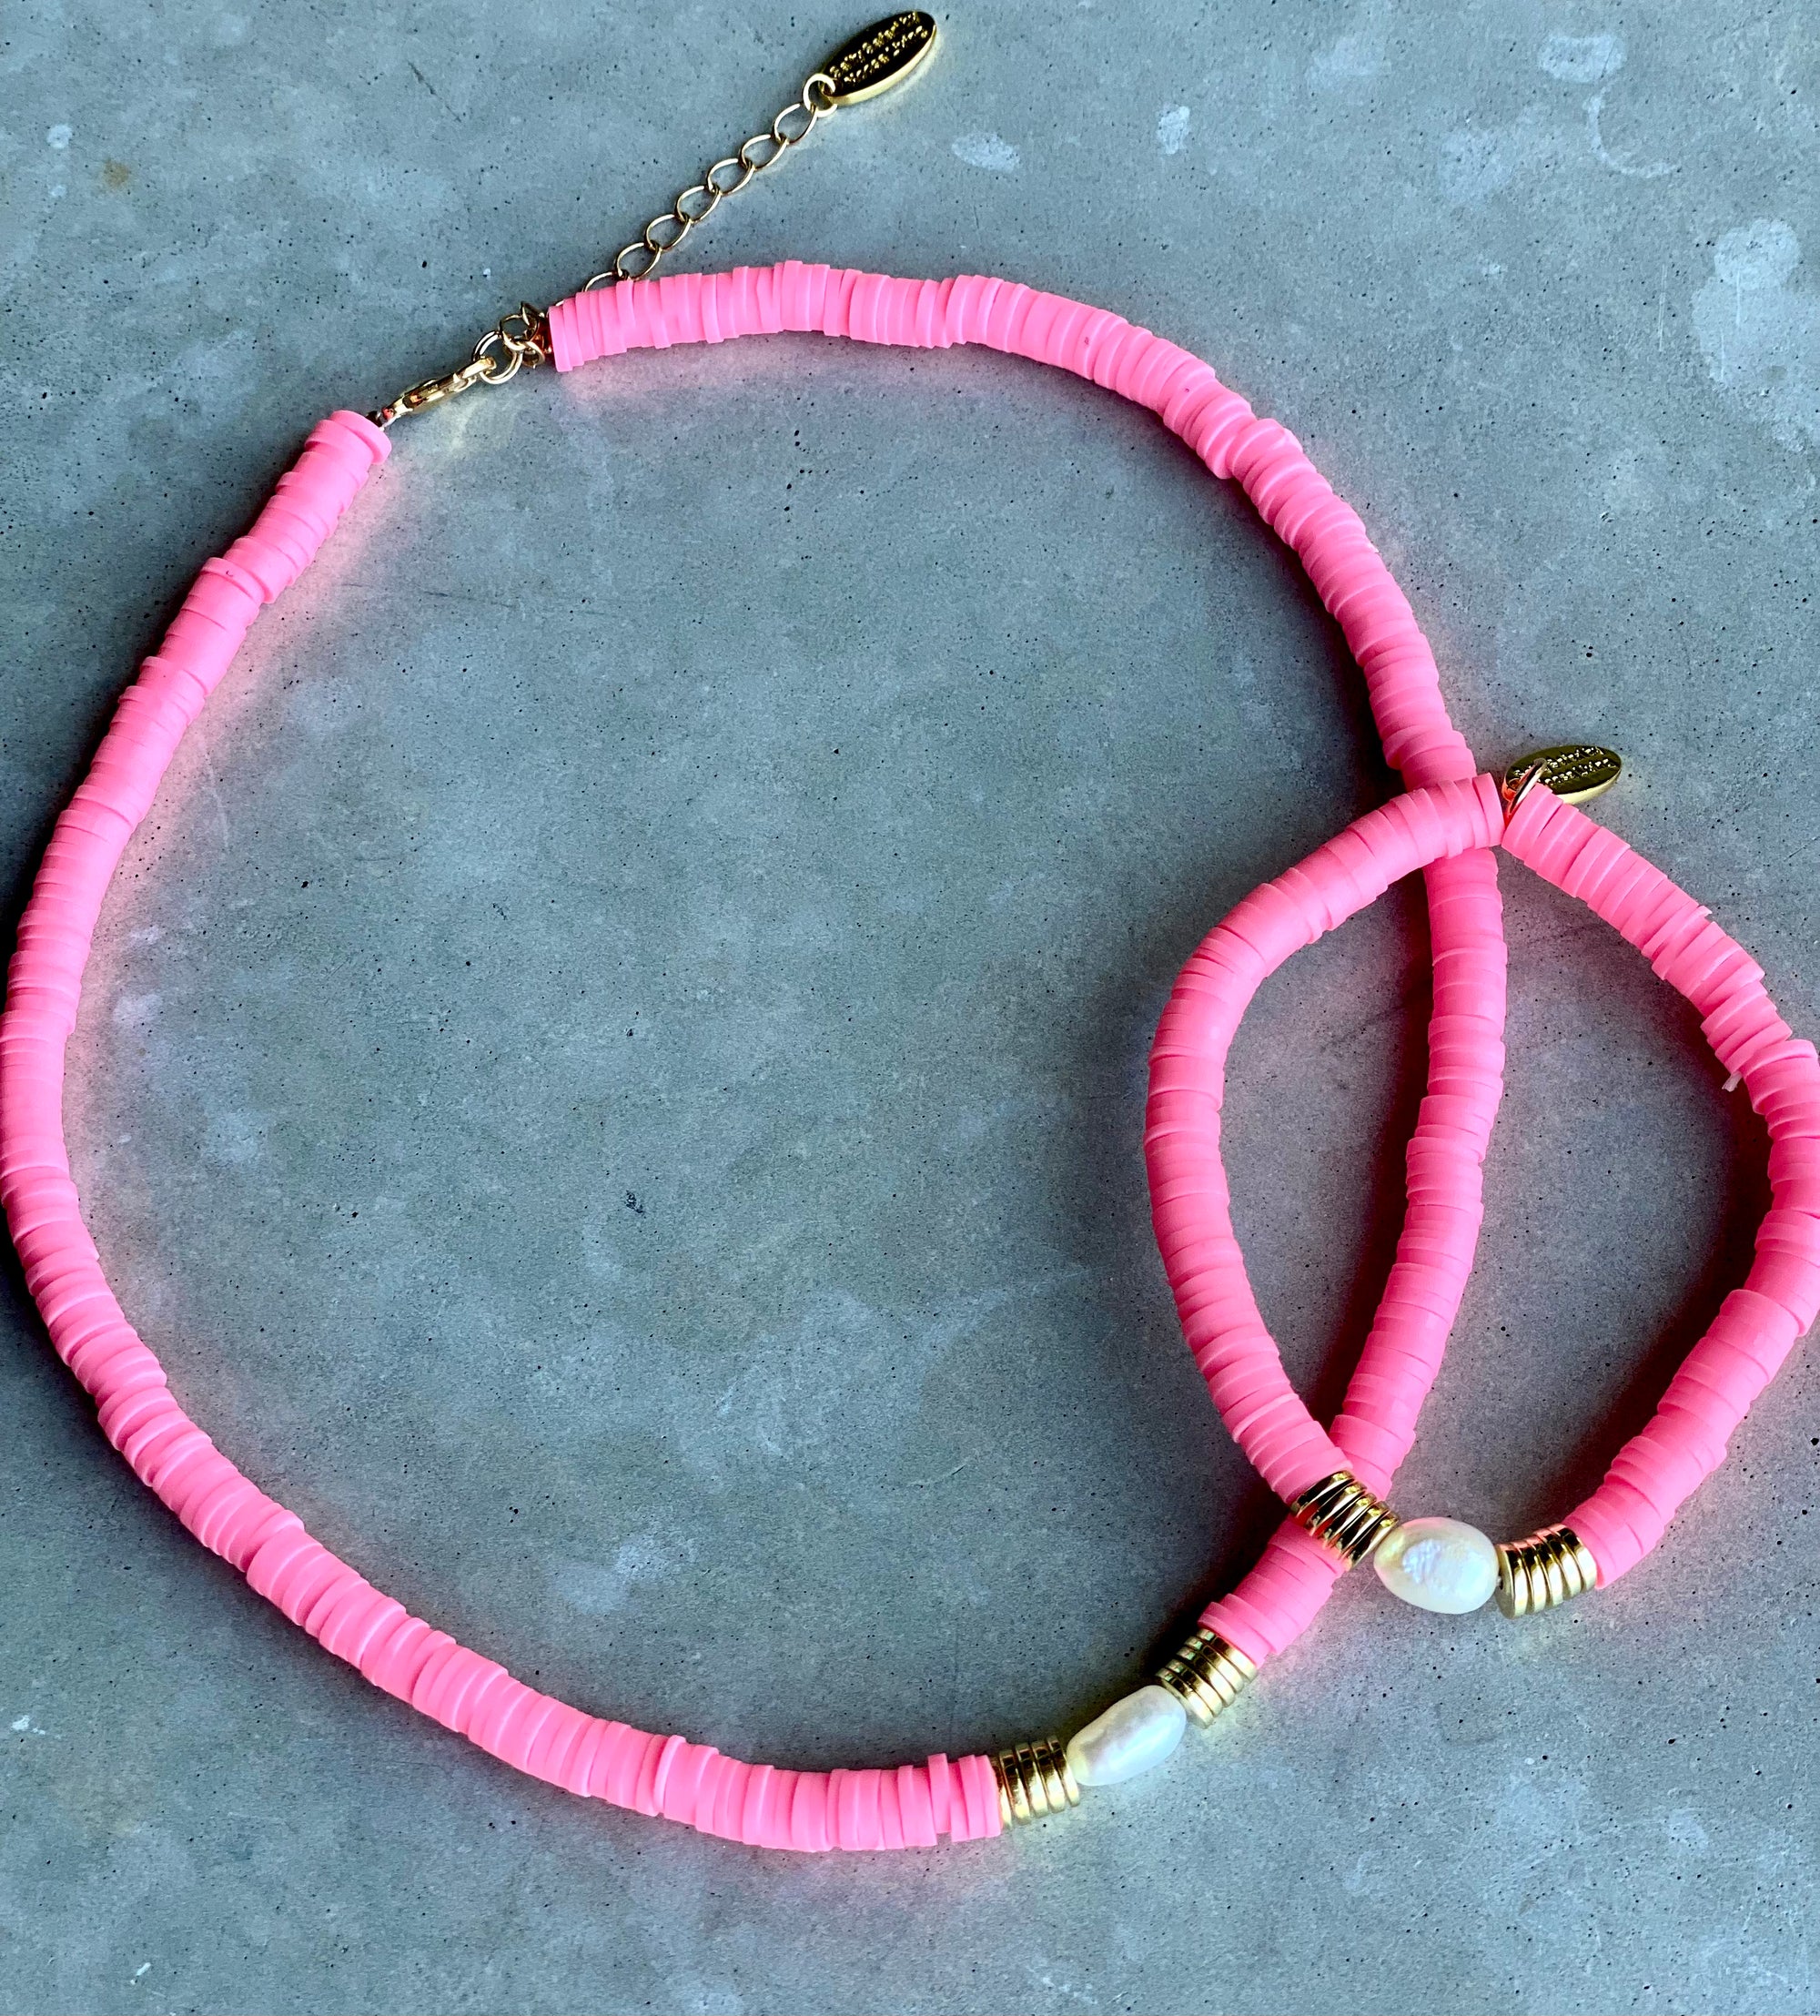 Cleopatra necklace - Neon Pink